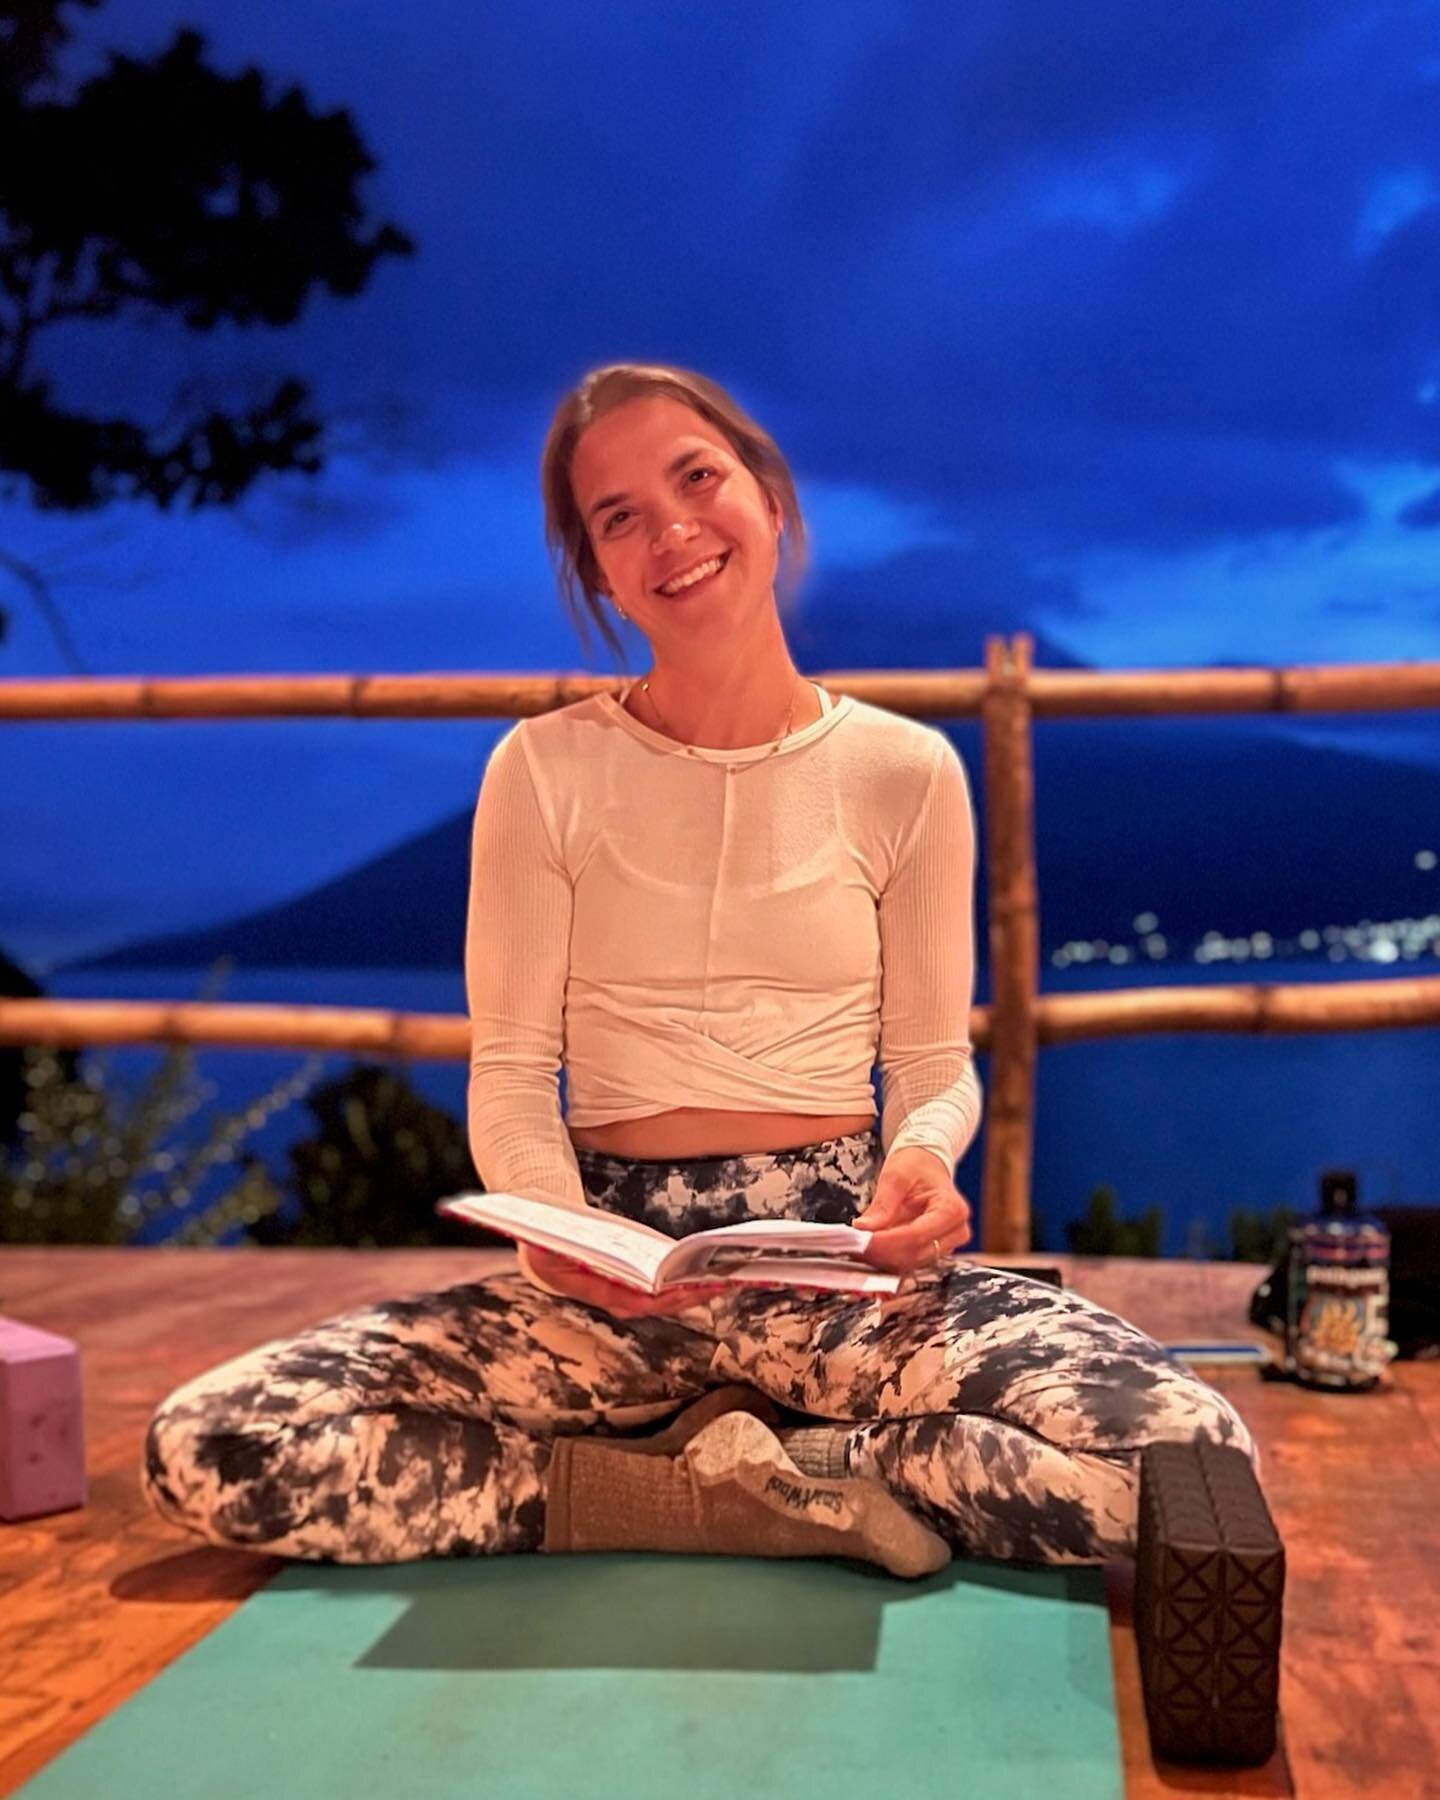 I just got back from leading a yoga retreat at Lake Atitl&aacute;n in Guatemala with @caitishappy and it was incredible! 

I picked a few of the million photos and videos I have to share today (I&rsquo;m sure I&rsquo;ll share more later). 

Hosting a